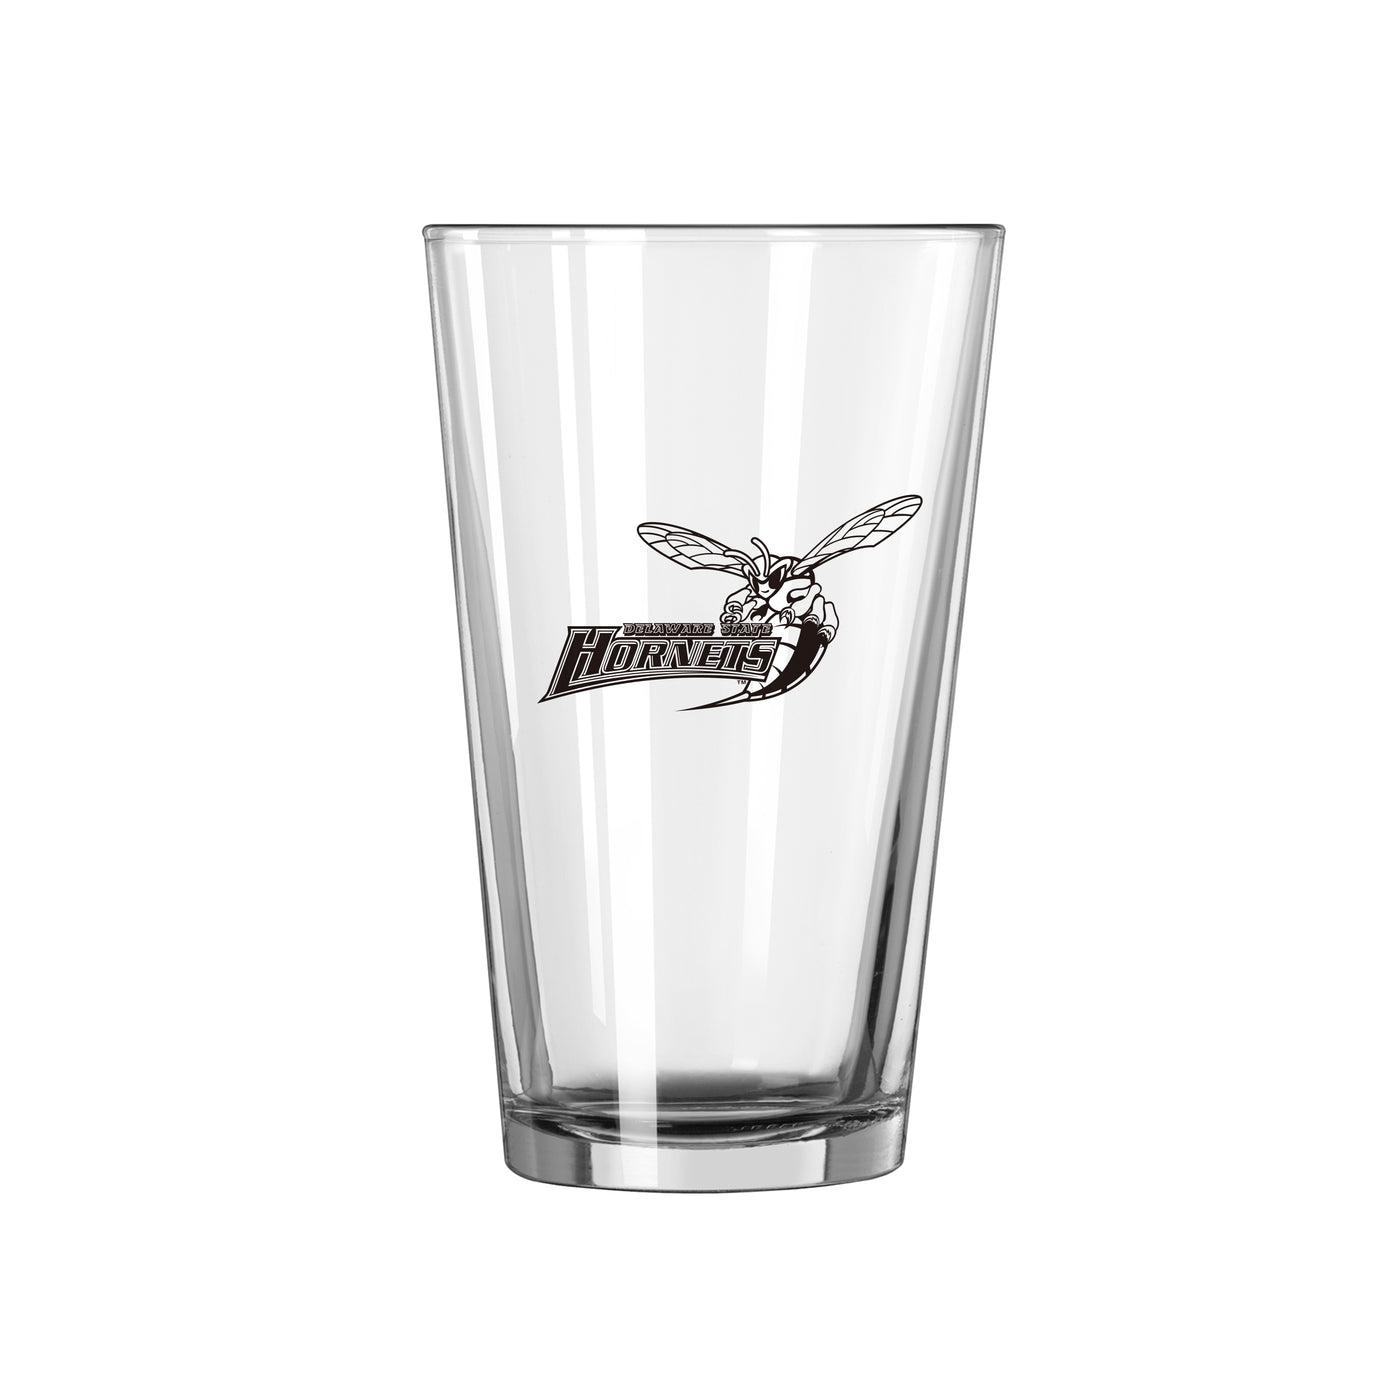 Delaware State 16oz Gameday Pint Glass